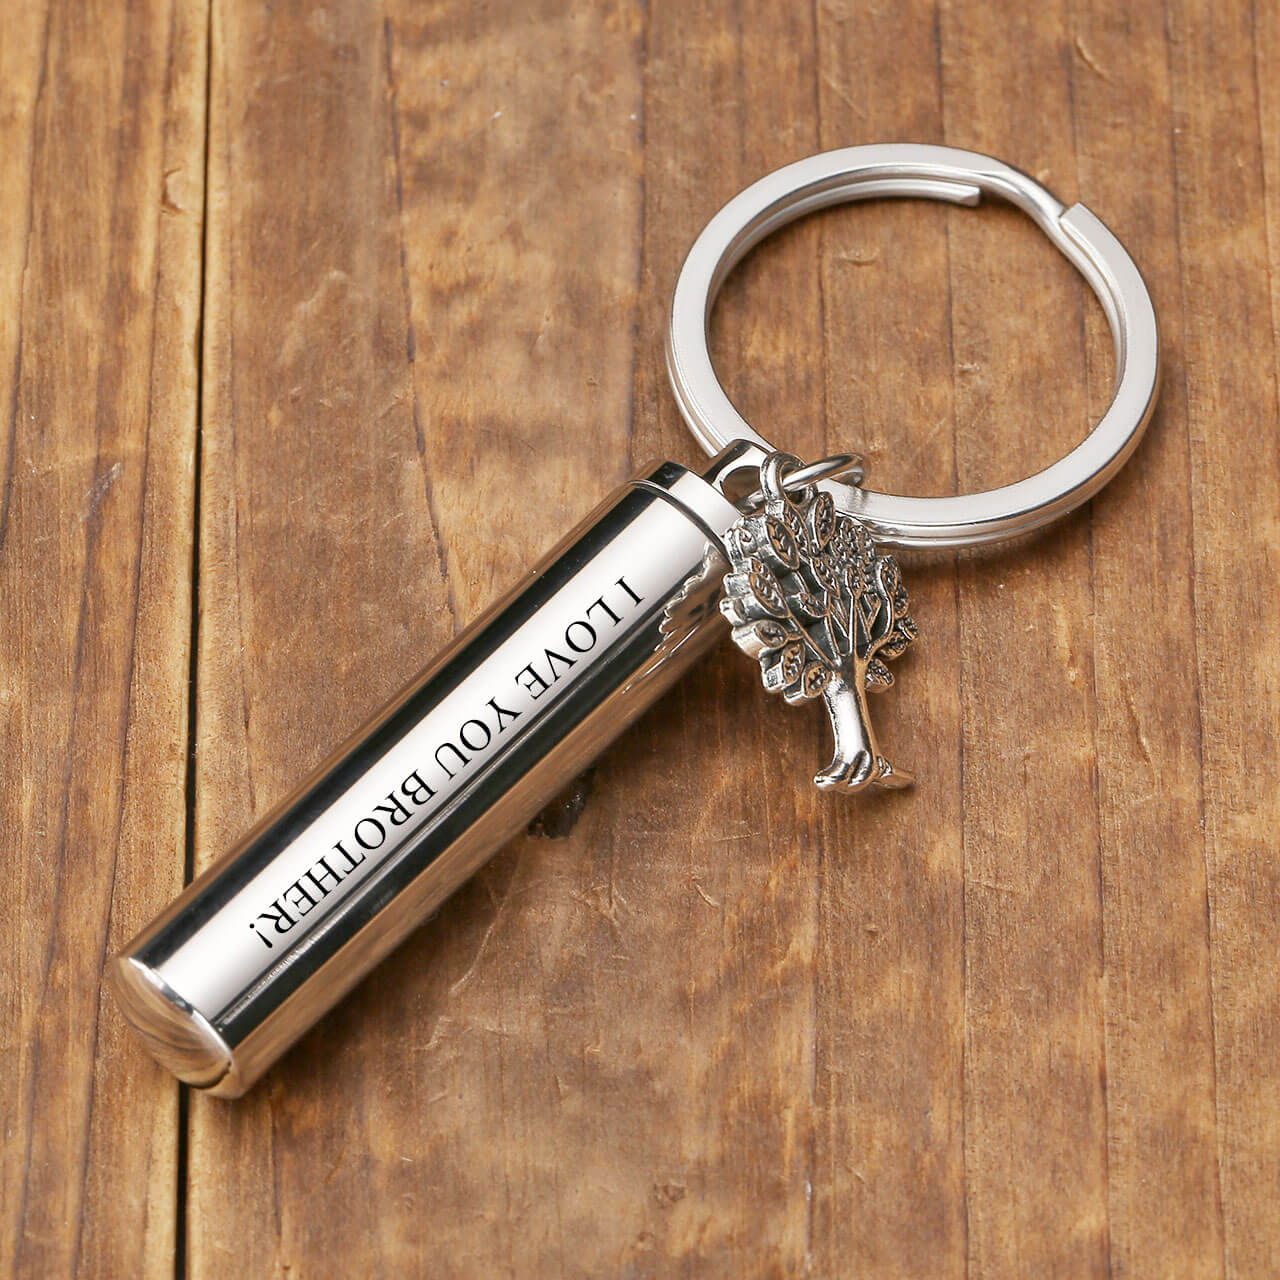 jovivi personalized cylinder urn keychain for ashes cremation memorial key ring with tree of life charm, front side, jnf006401